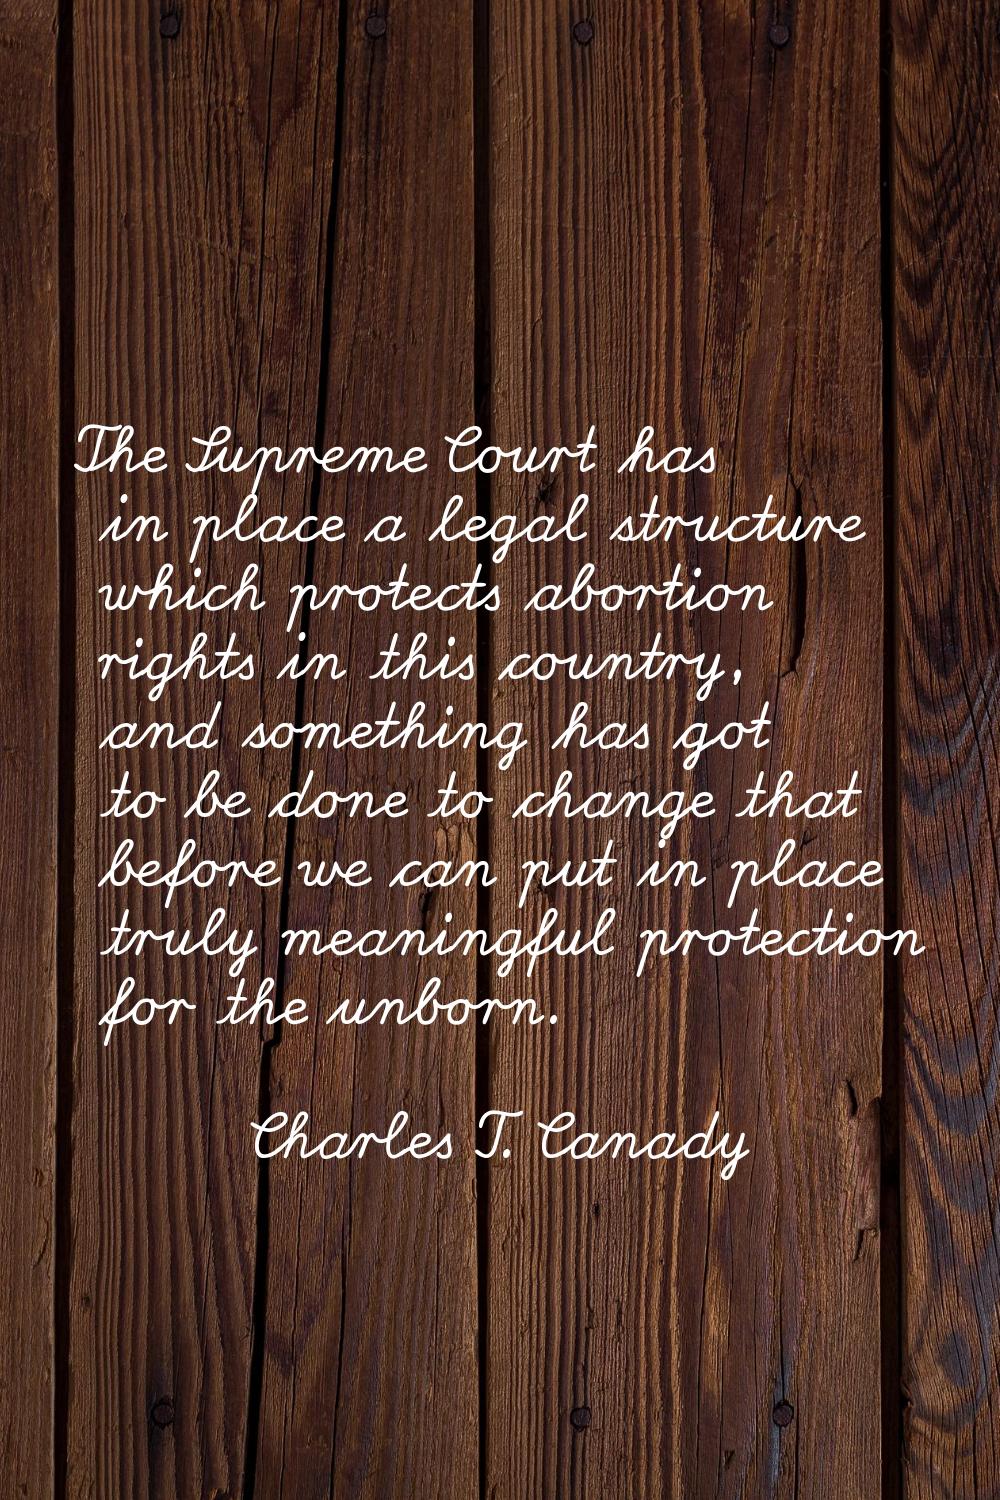 The Supreme Court has in place a legal structure which protects abortion rights in this country, an